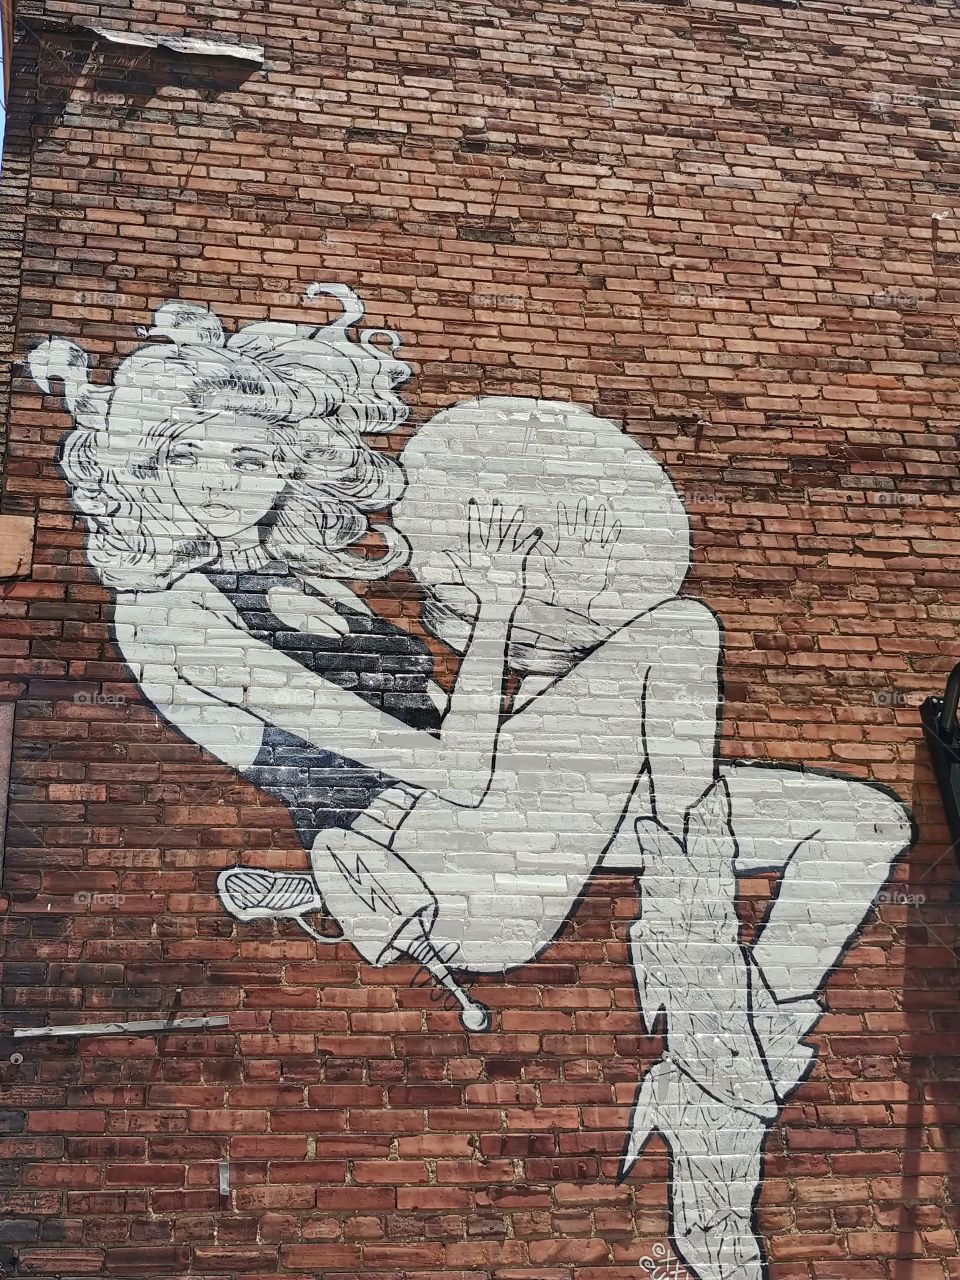 A wall mural of a space woman painted on a wall in downtown Louisville Kentucky